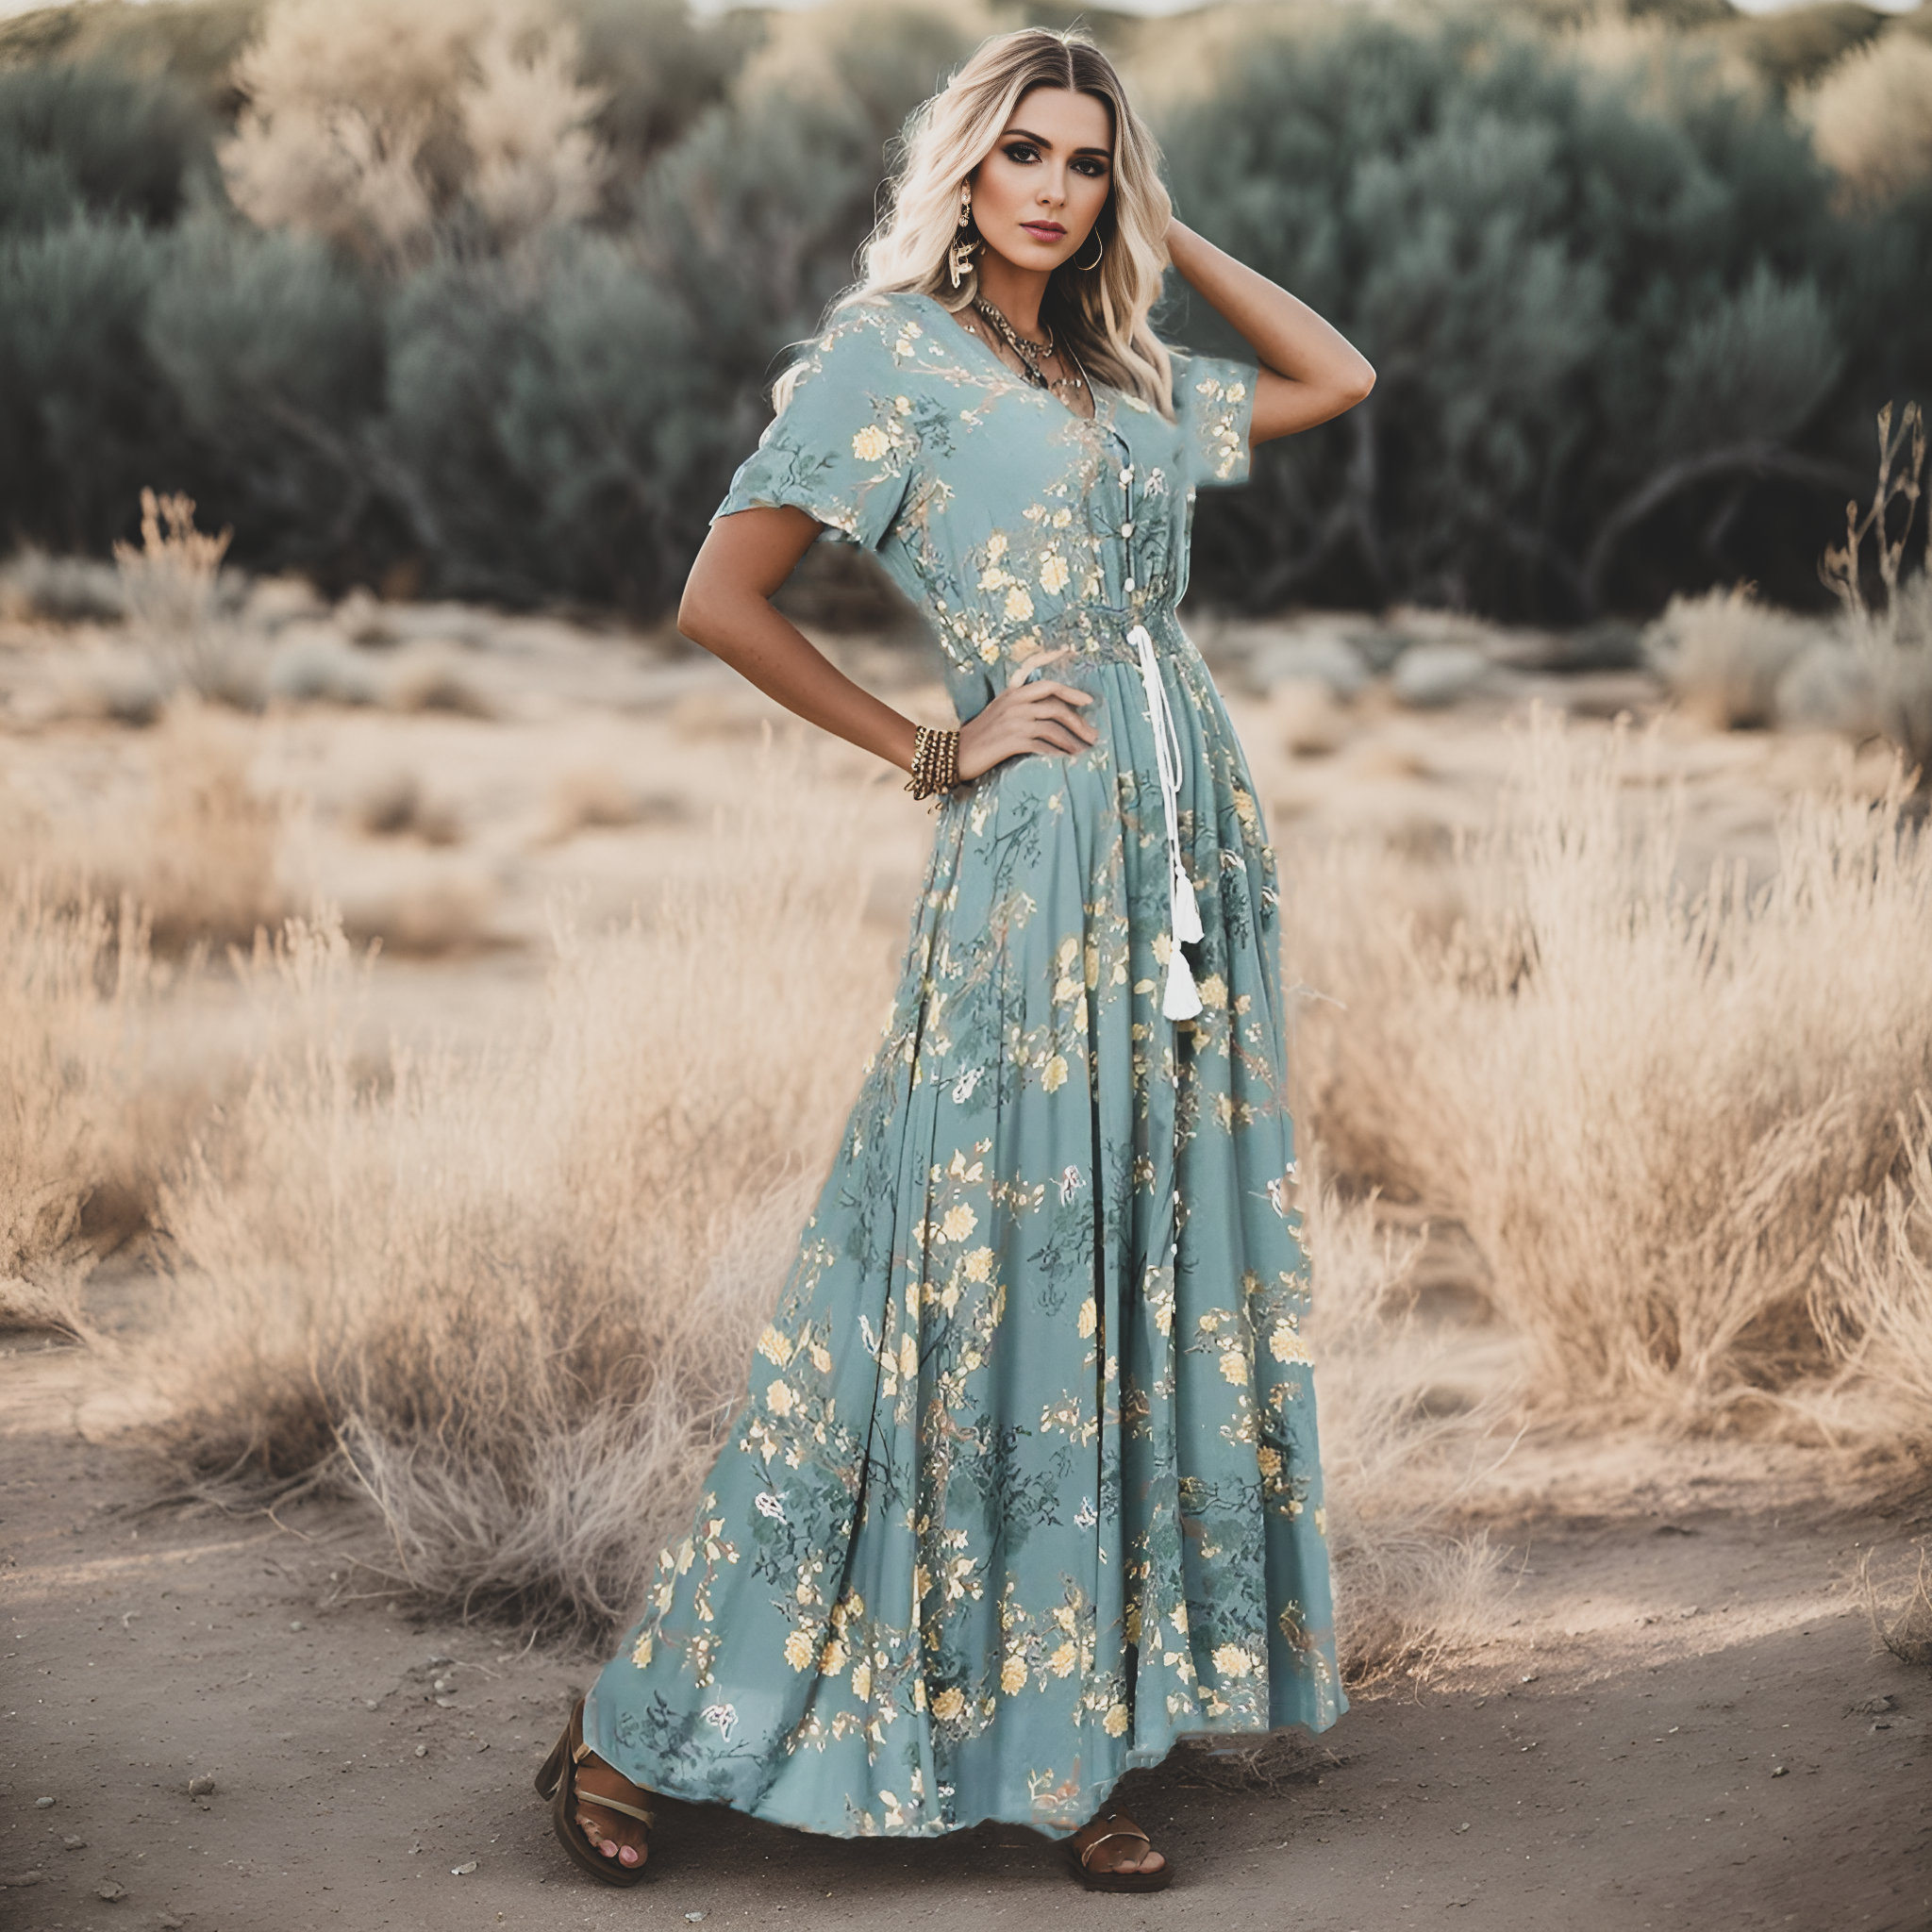 Buy Floral Maxi Dress women clothing online